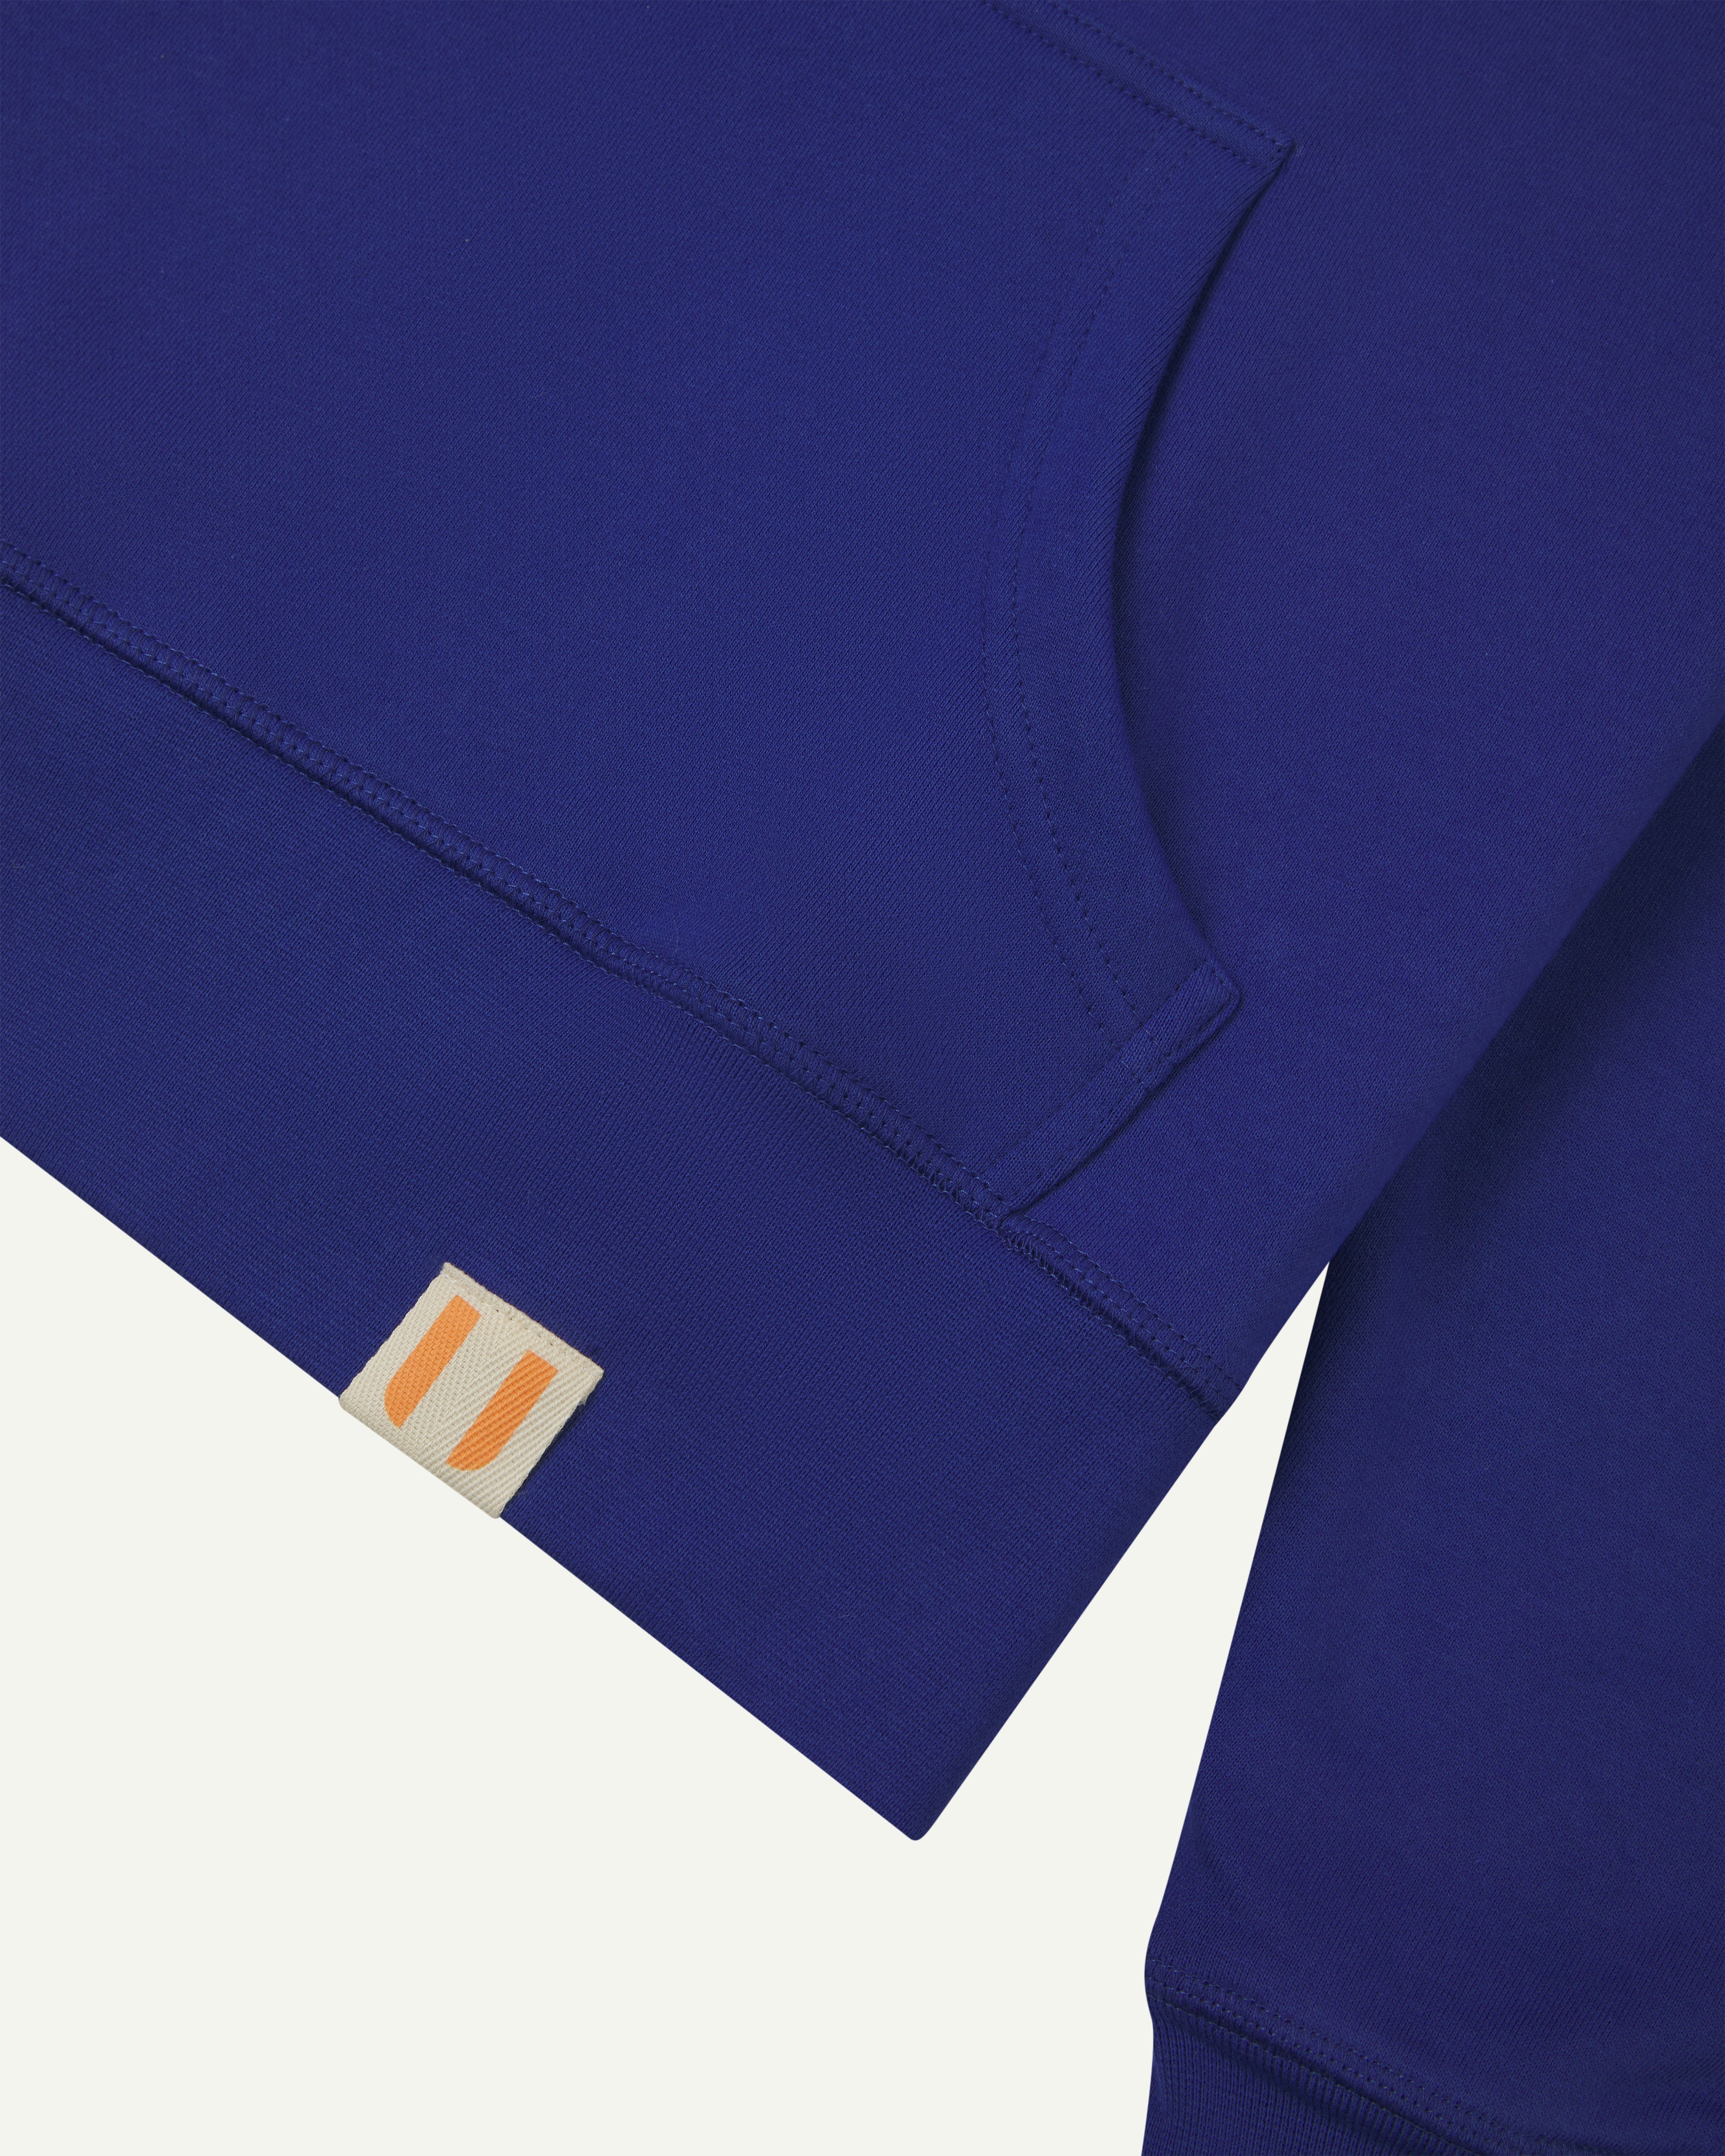 Hooded tracksuit  - ultra blue